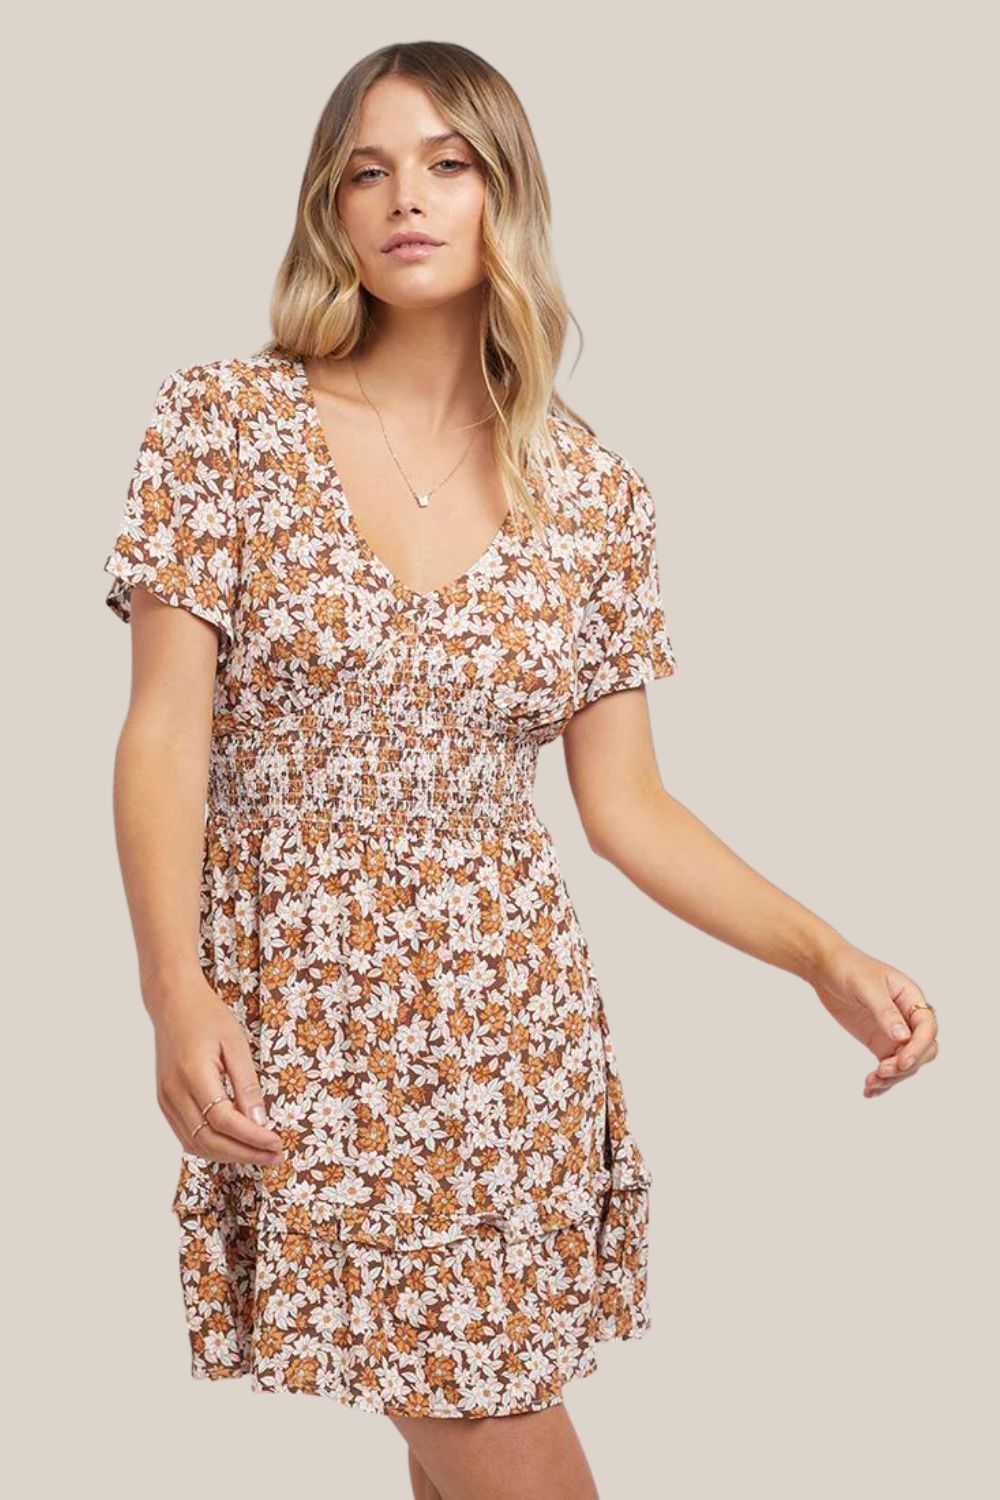 All About Eve Willa Floral Mini Dress